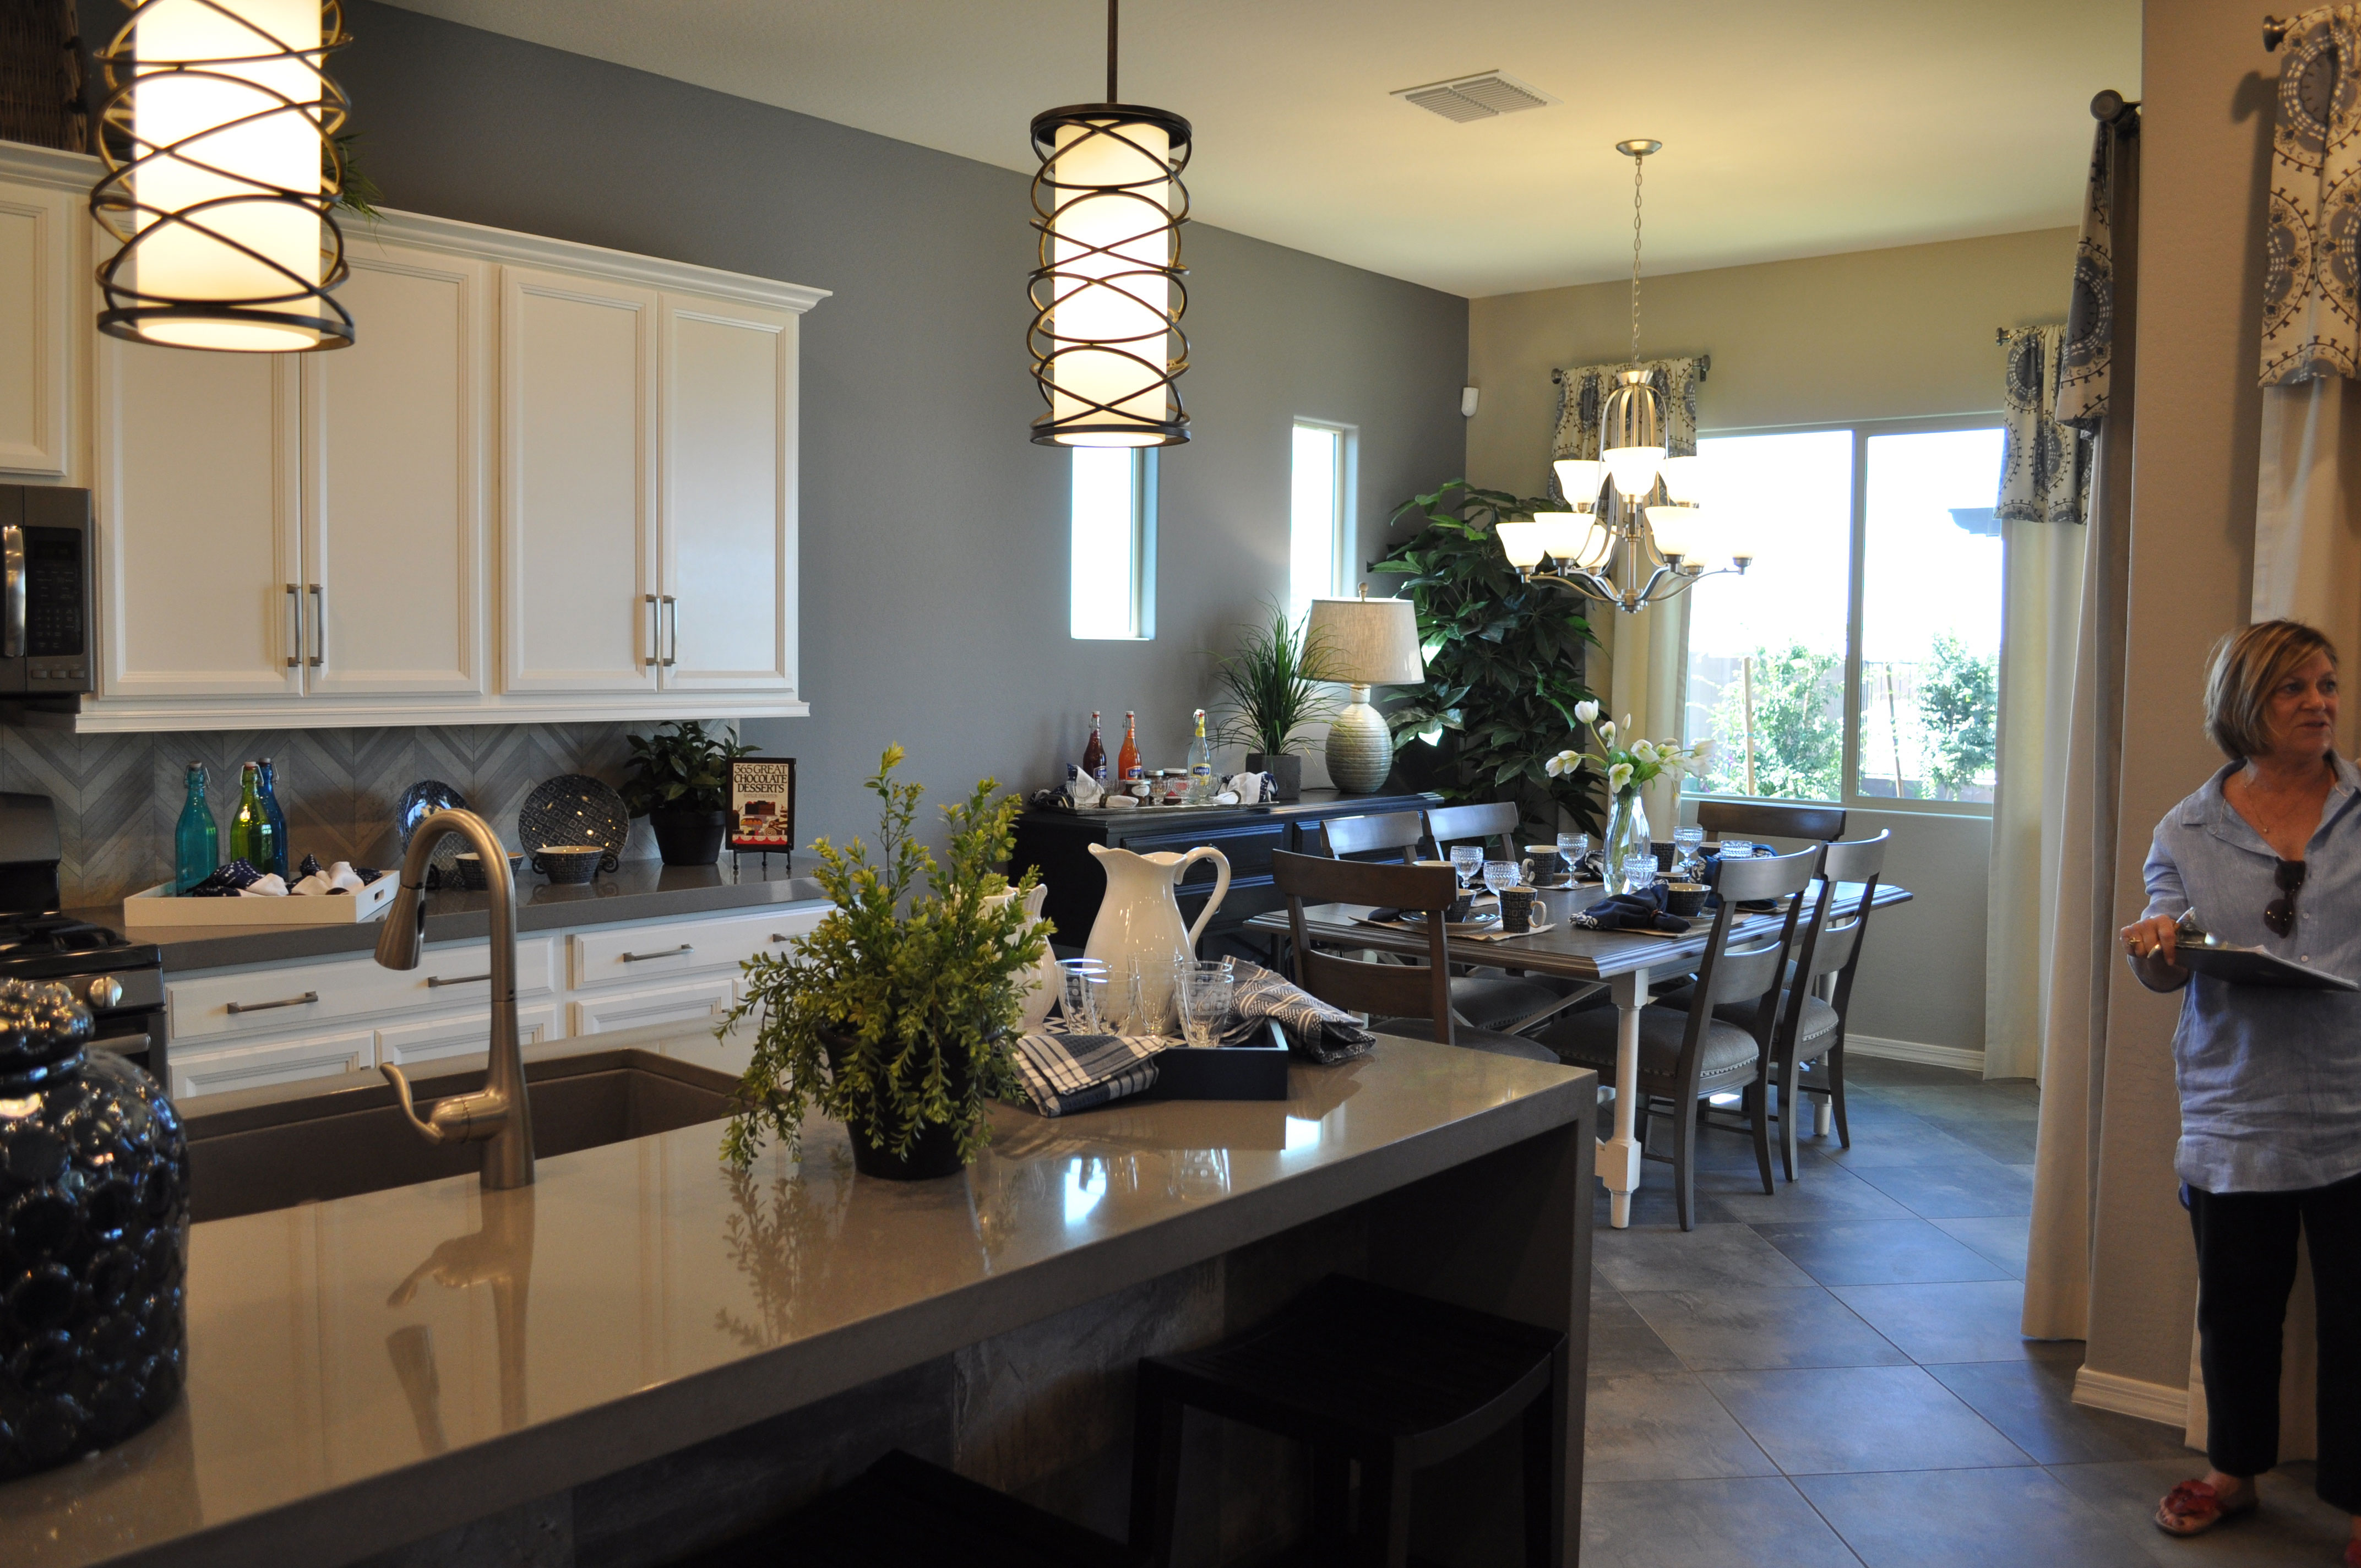 Kitchen from the Rancho Mirage model in the Oasis at Queen Creek Community